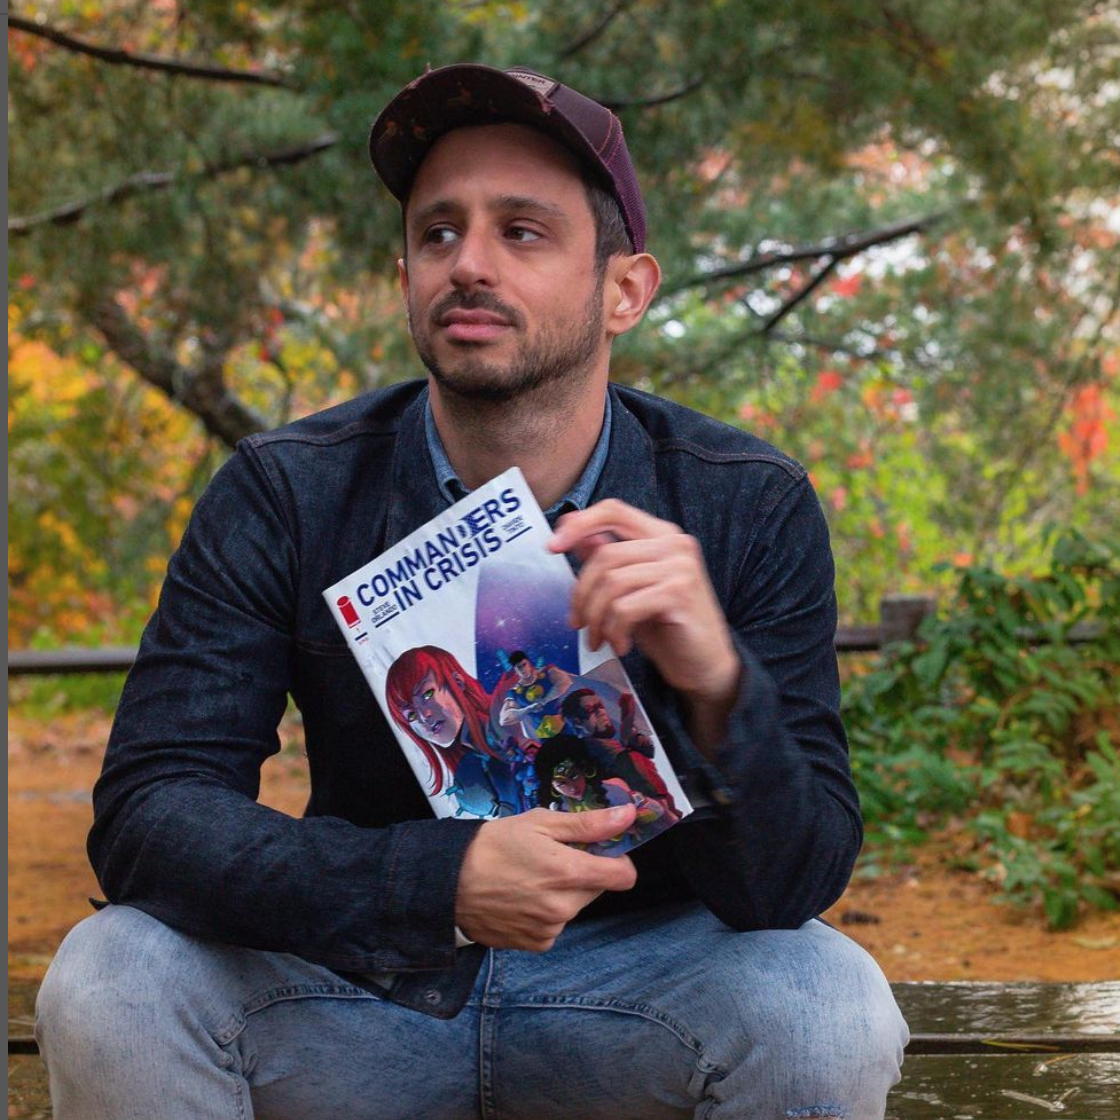 Steve Orlando sitting on a bench outdoors with a comic in his hands while he looks to his side.